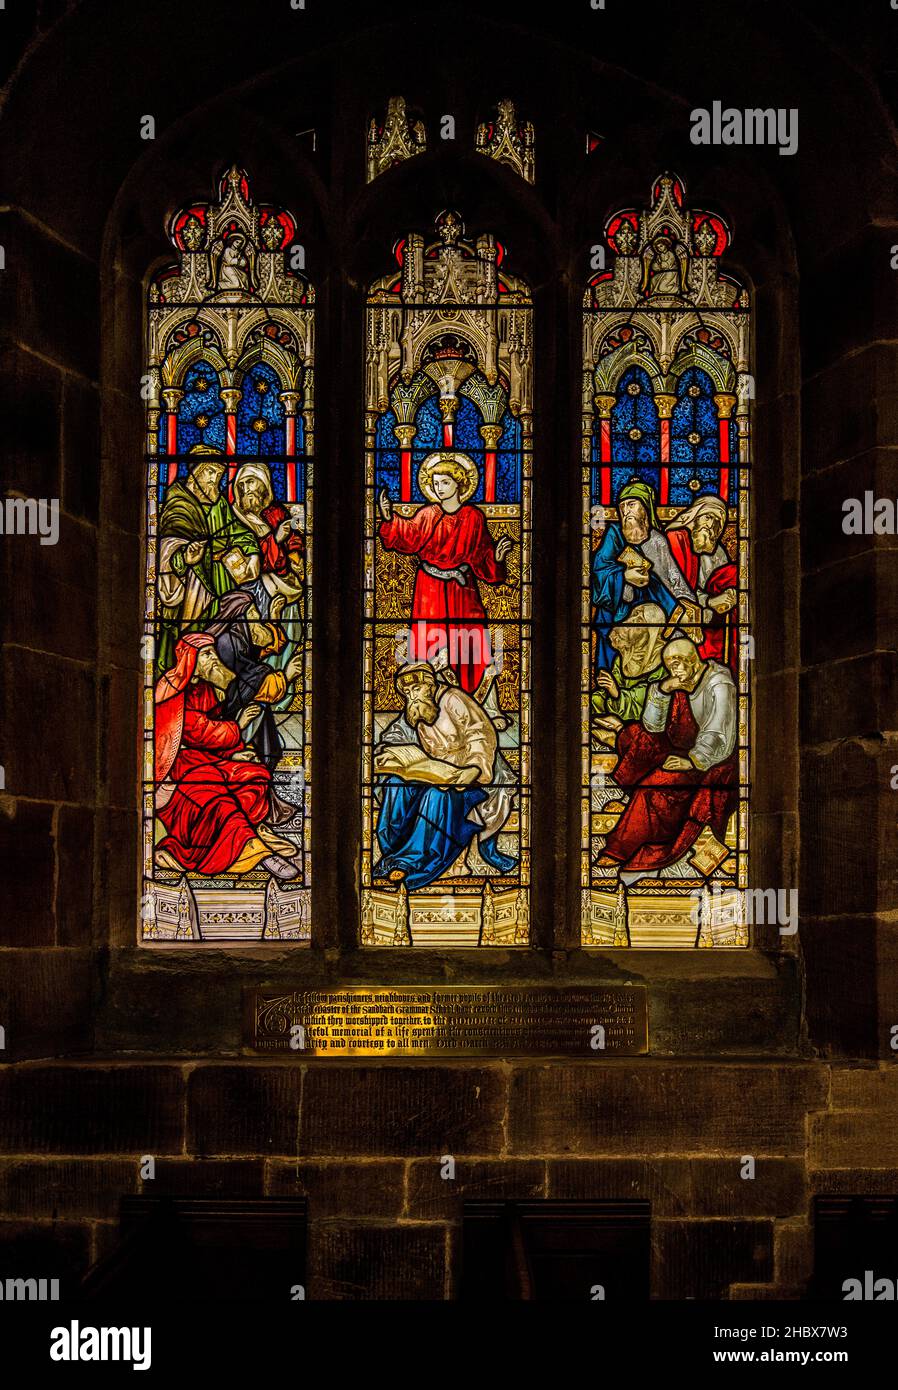 The church of St Marys, Sandbach features many beautiful stained glass windows. Stock Photo